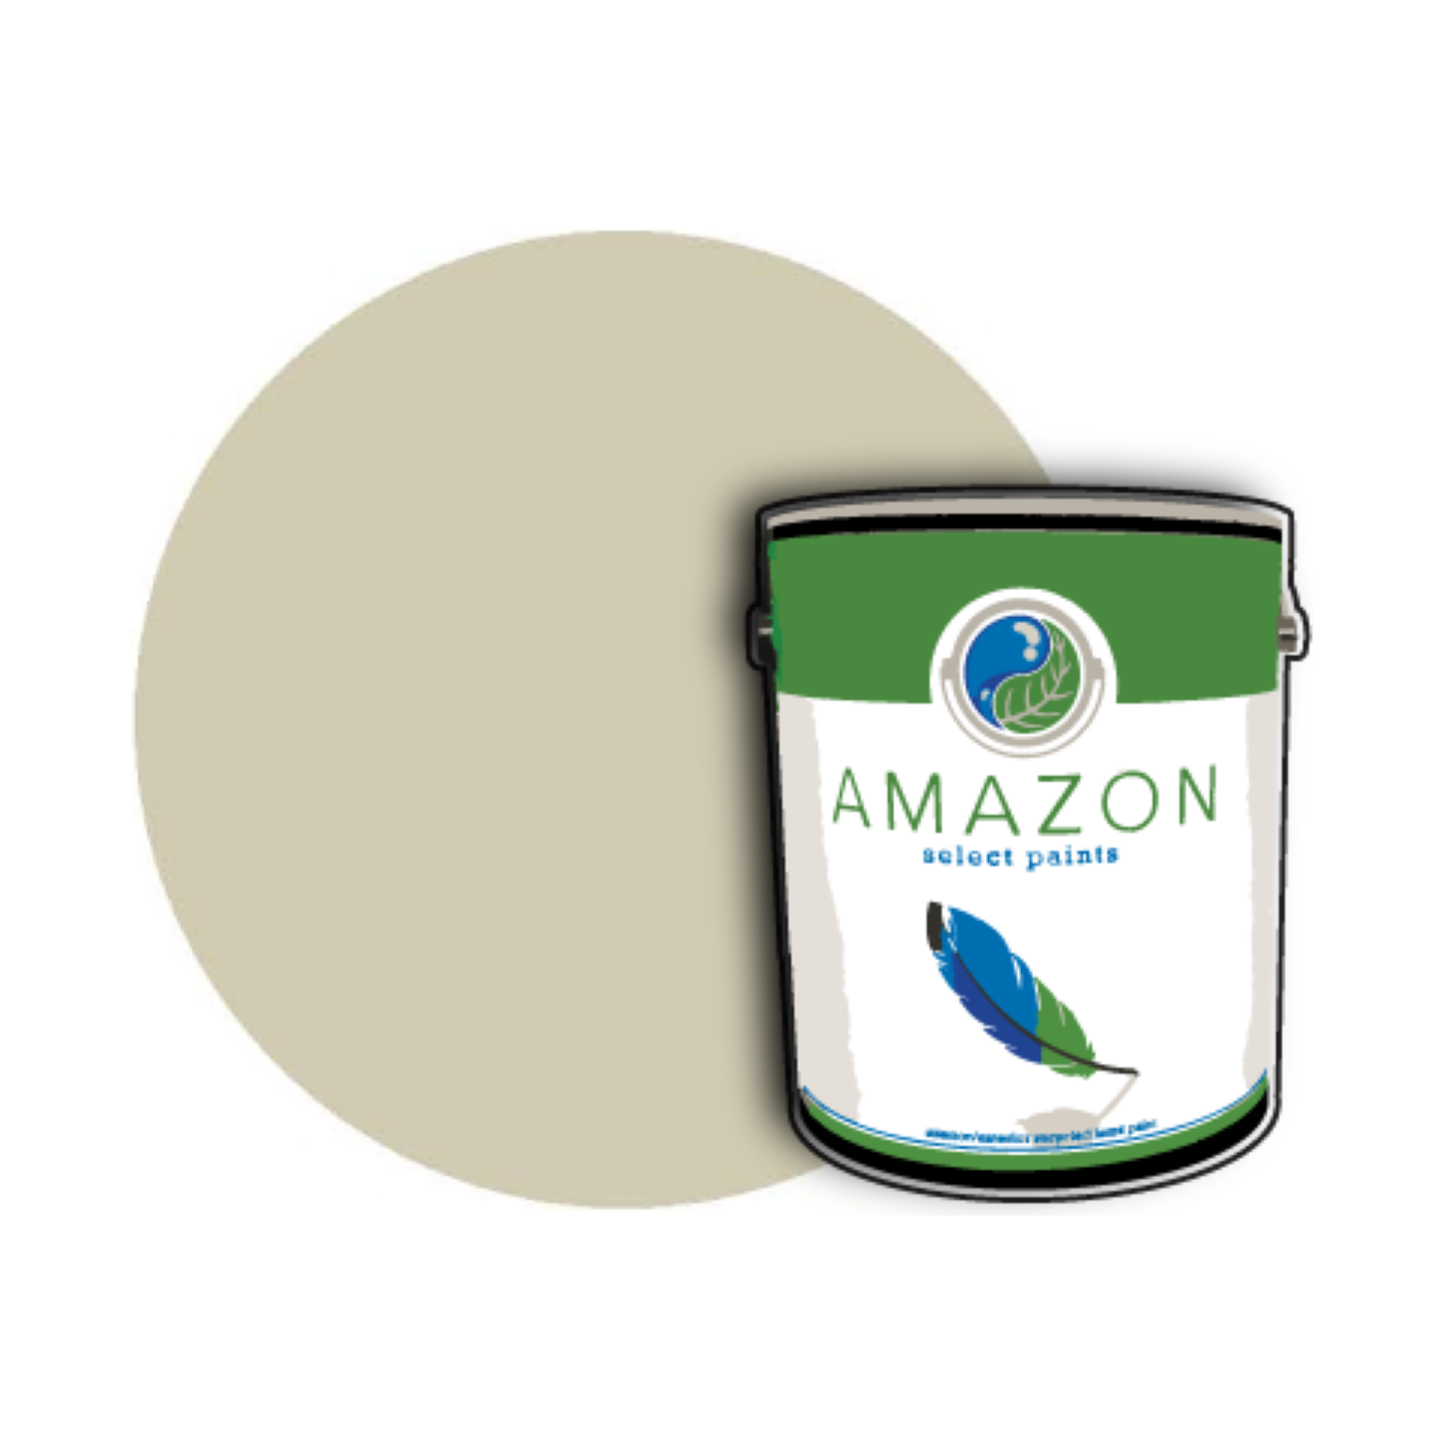 Shop now for Amazon Paint in a beautiful Autumn Mist shade. Transform your space with this versatile and elegant color.